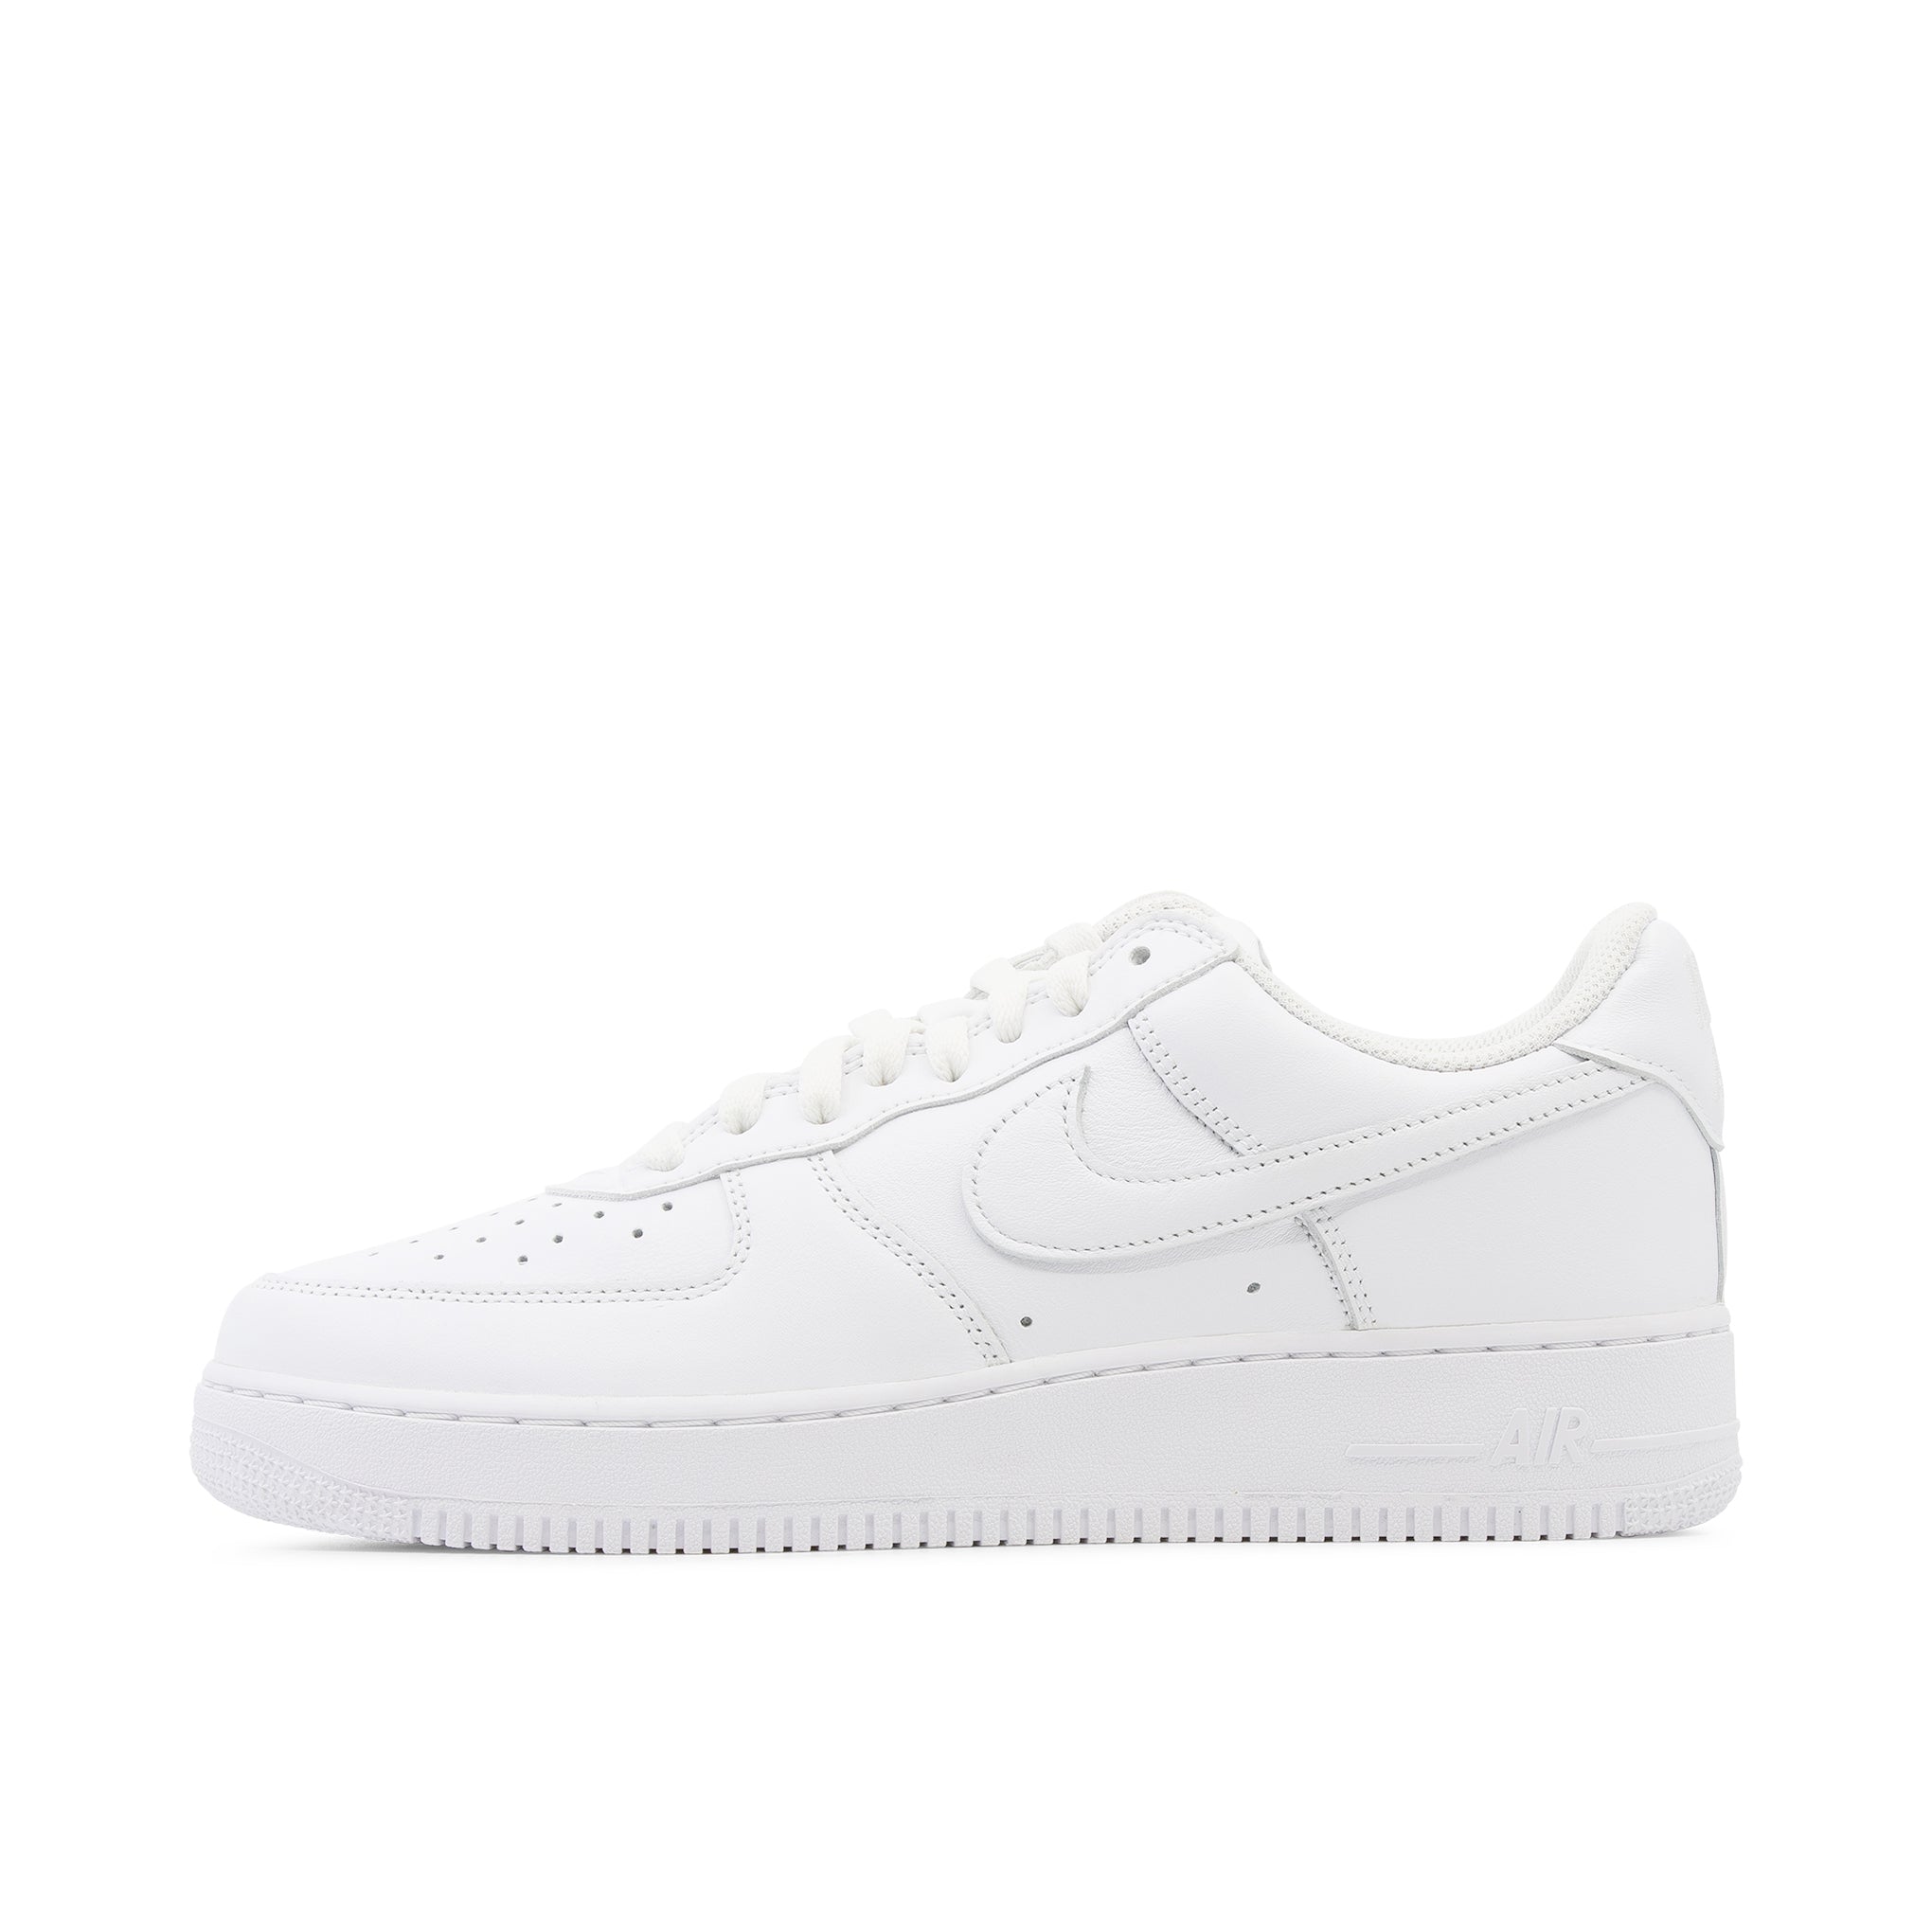 NIKE AIR FORCE 1 LOW COLOR DEL MES BLANCO